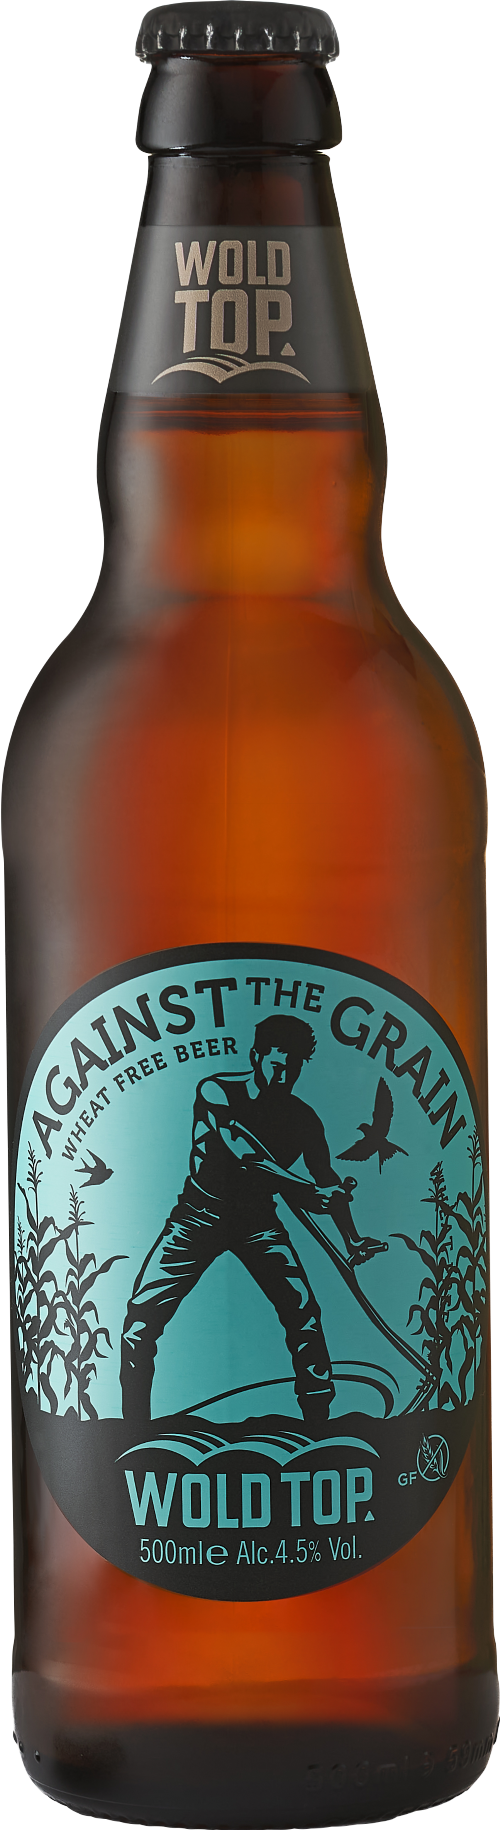 WOLD TOP Against the Grain Gluten Free Beer 4.5% ABV 500ml